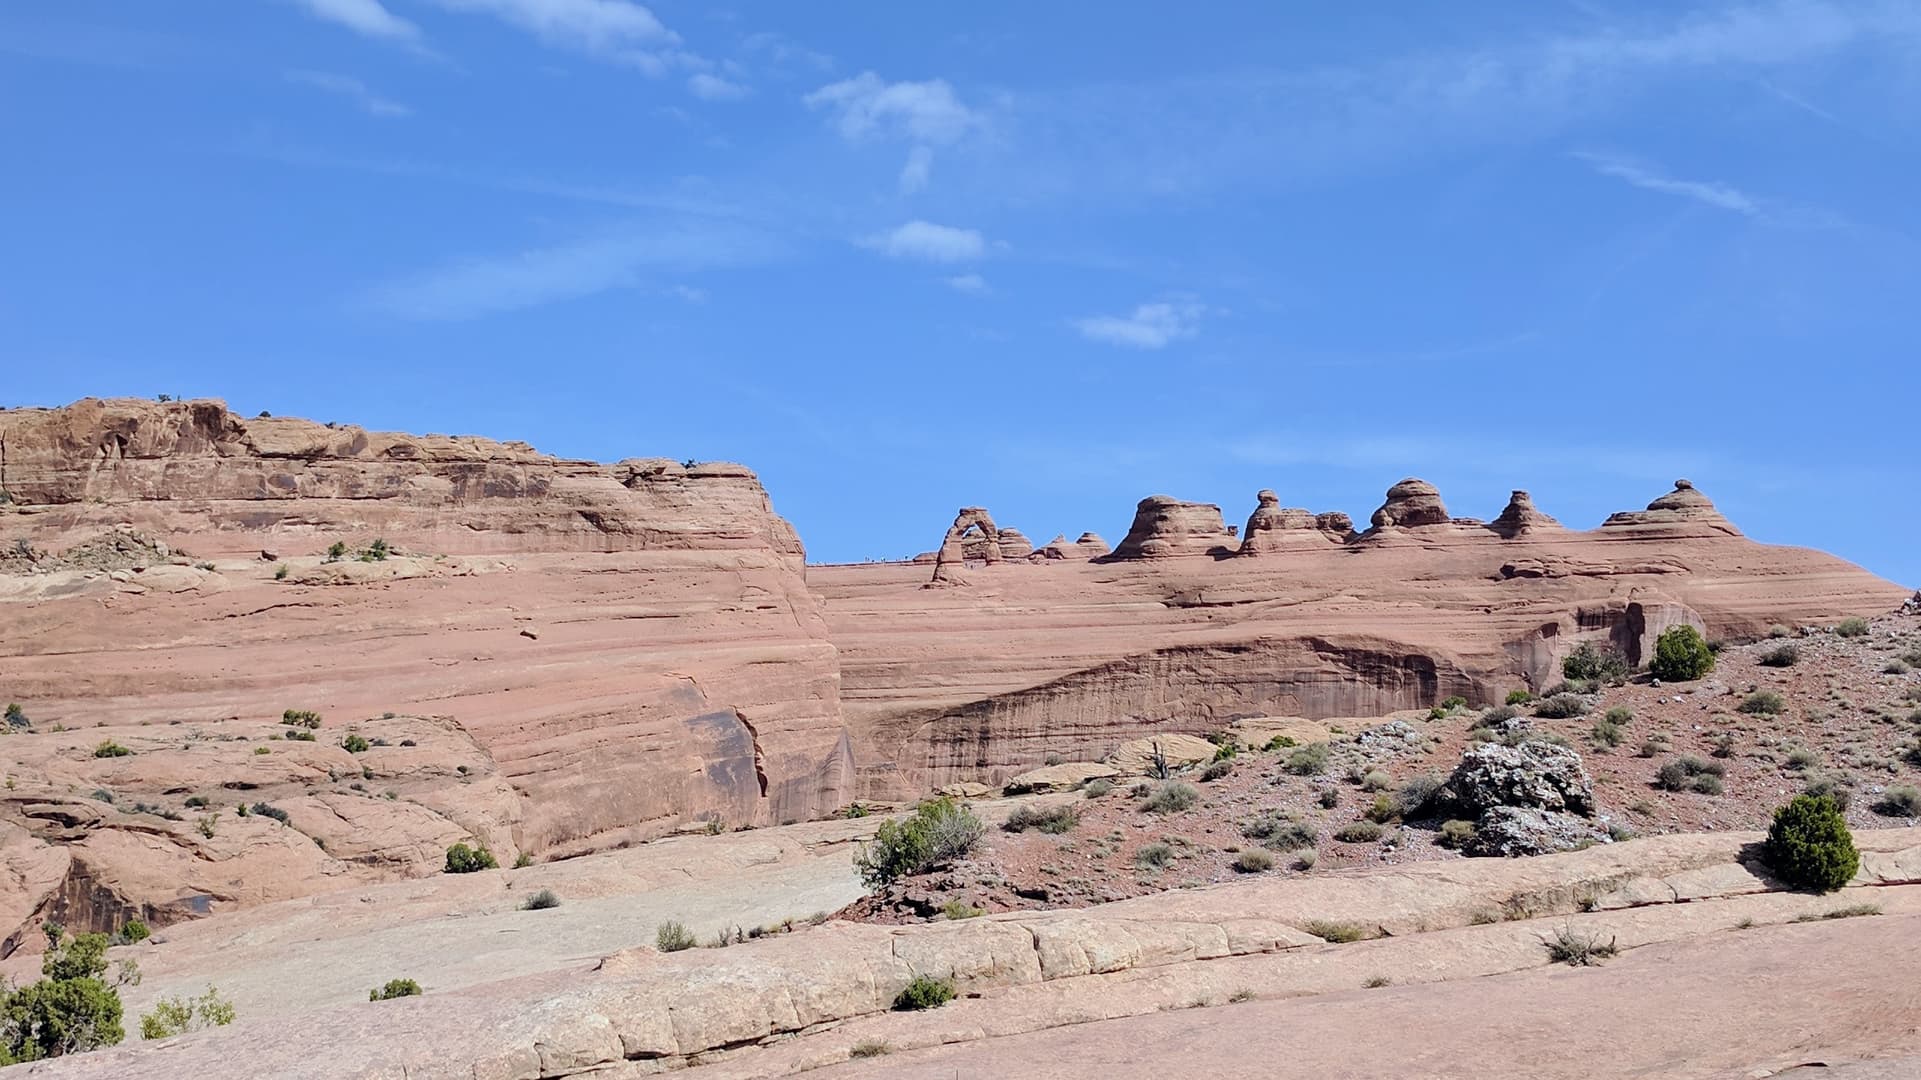 A distant view of Delicate Arch, which sits atop a large, wide sandstone fin. Scores of hikers, almost too small to see at this distance, cluster around it.